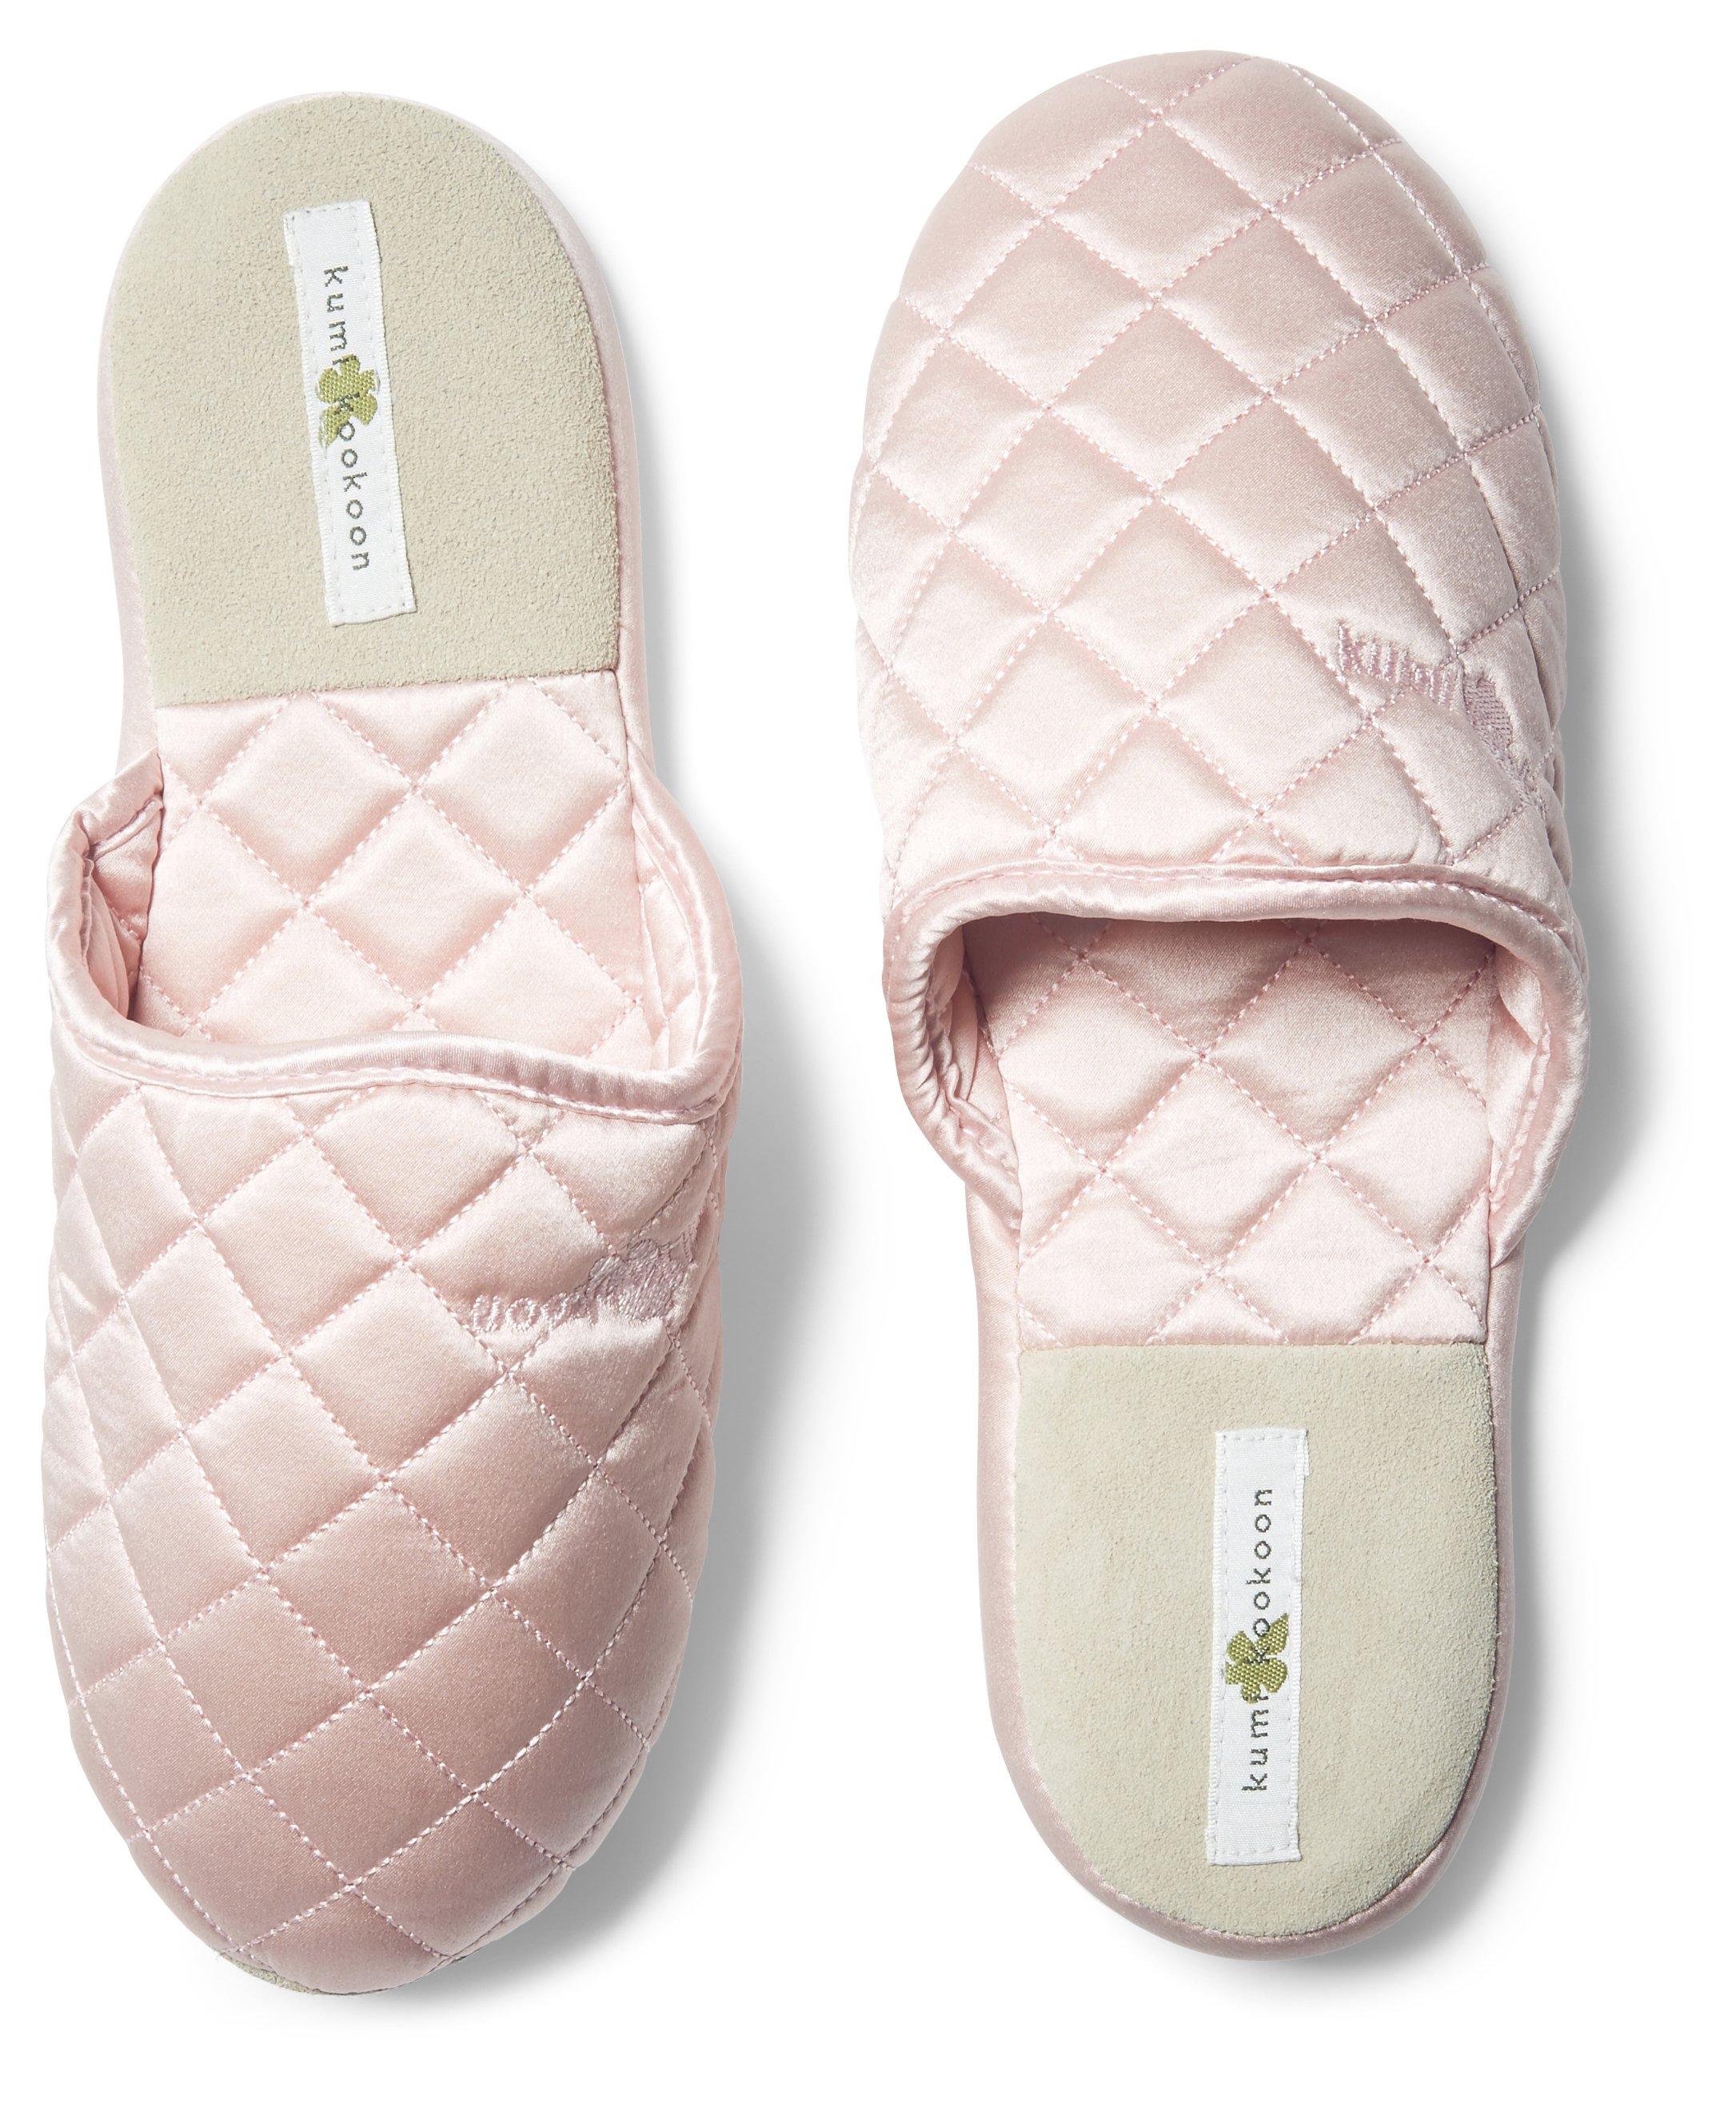 Quilted Slippers | One